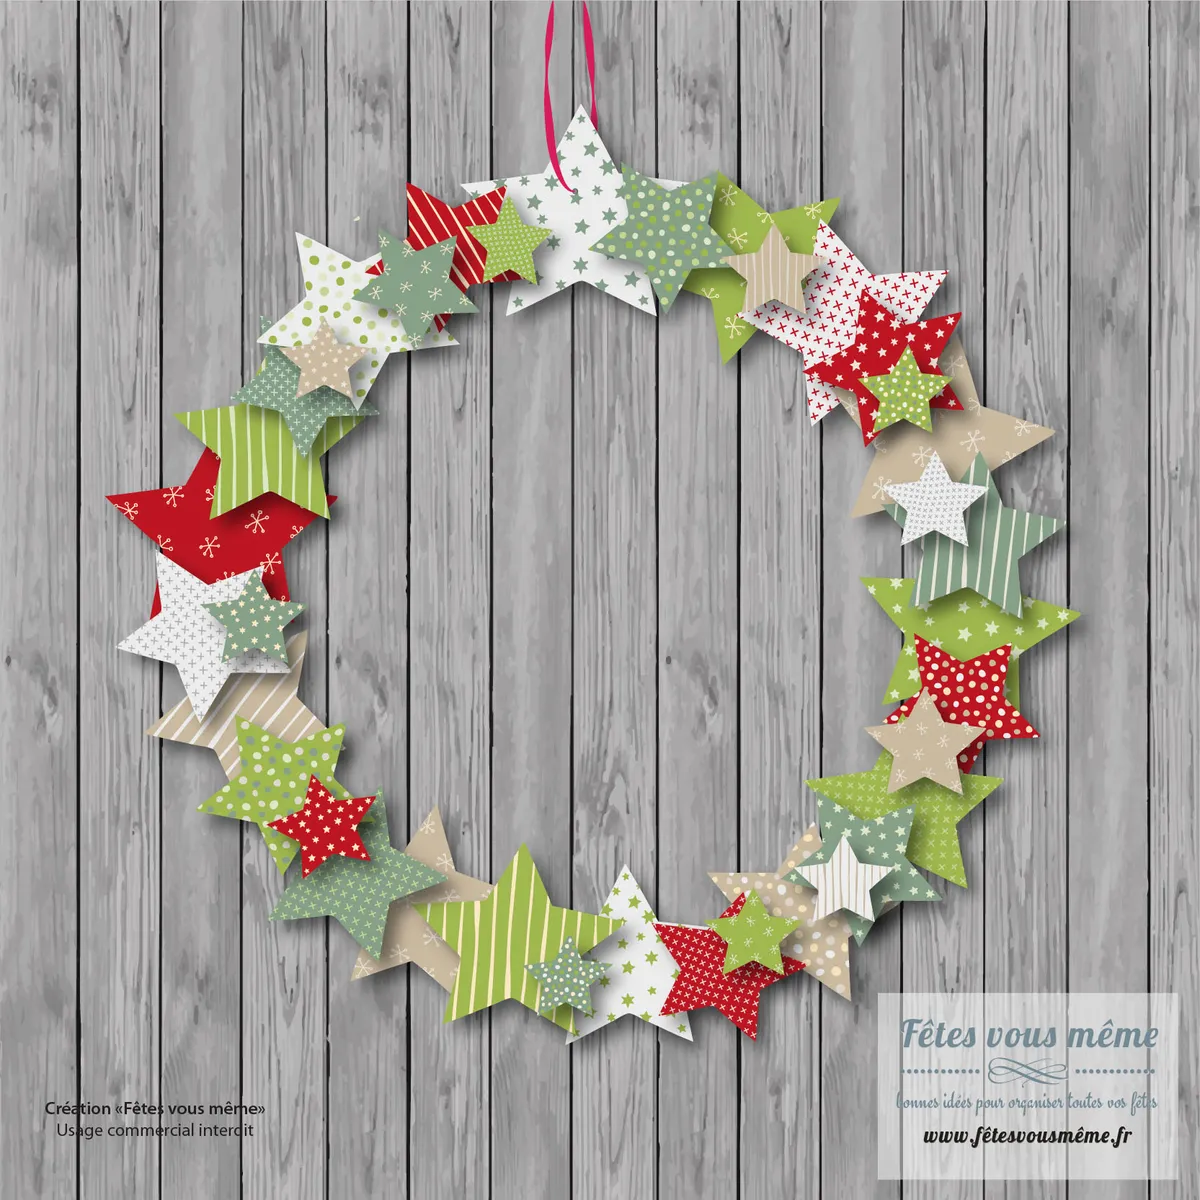 Recycled Christmas cards wreath